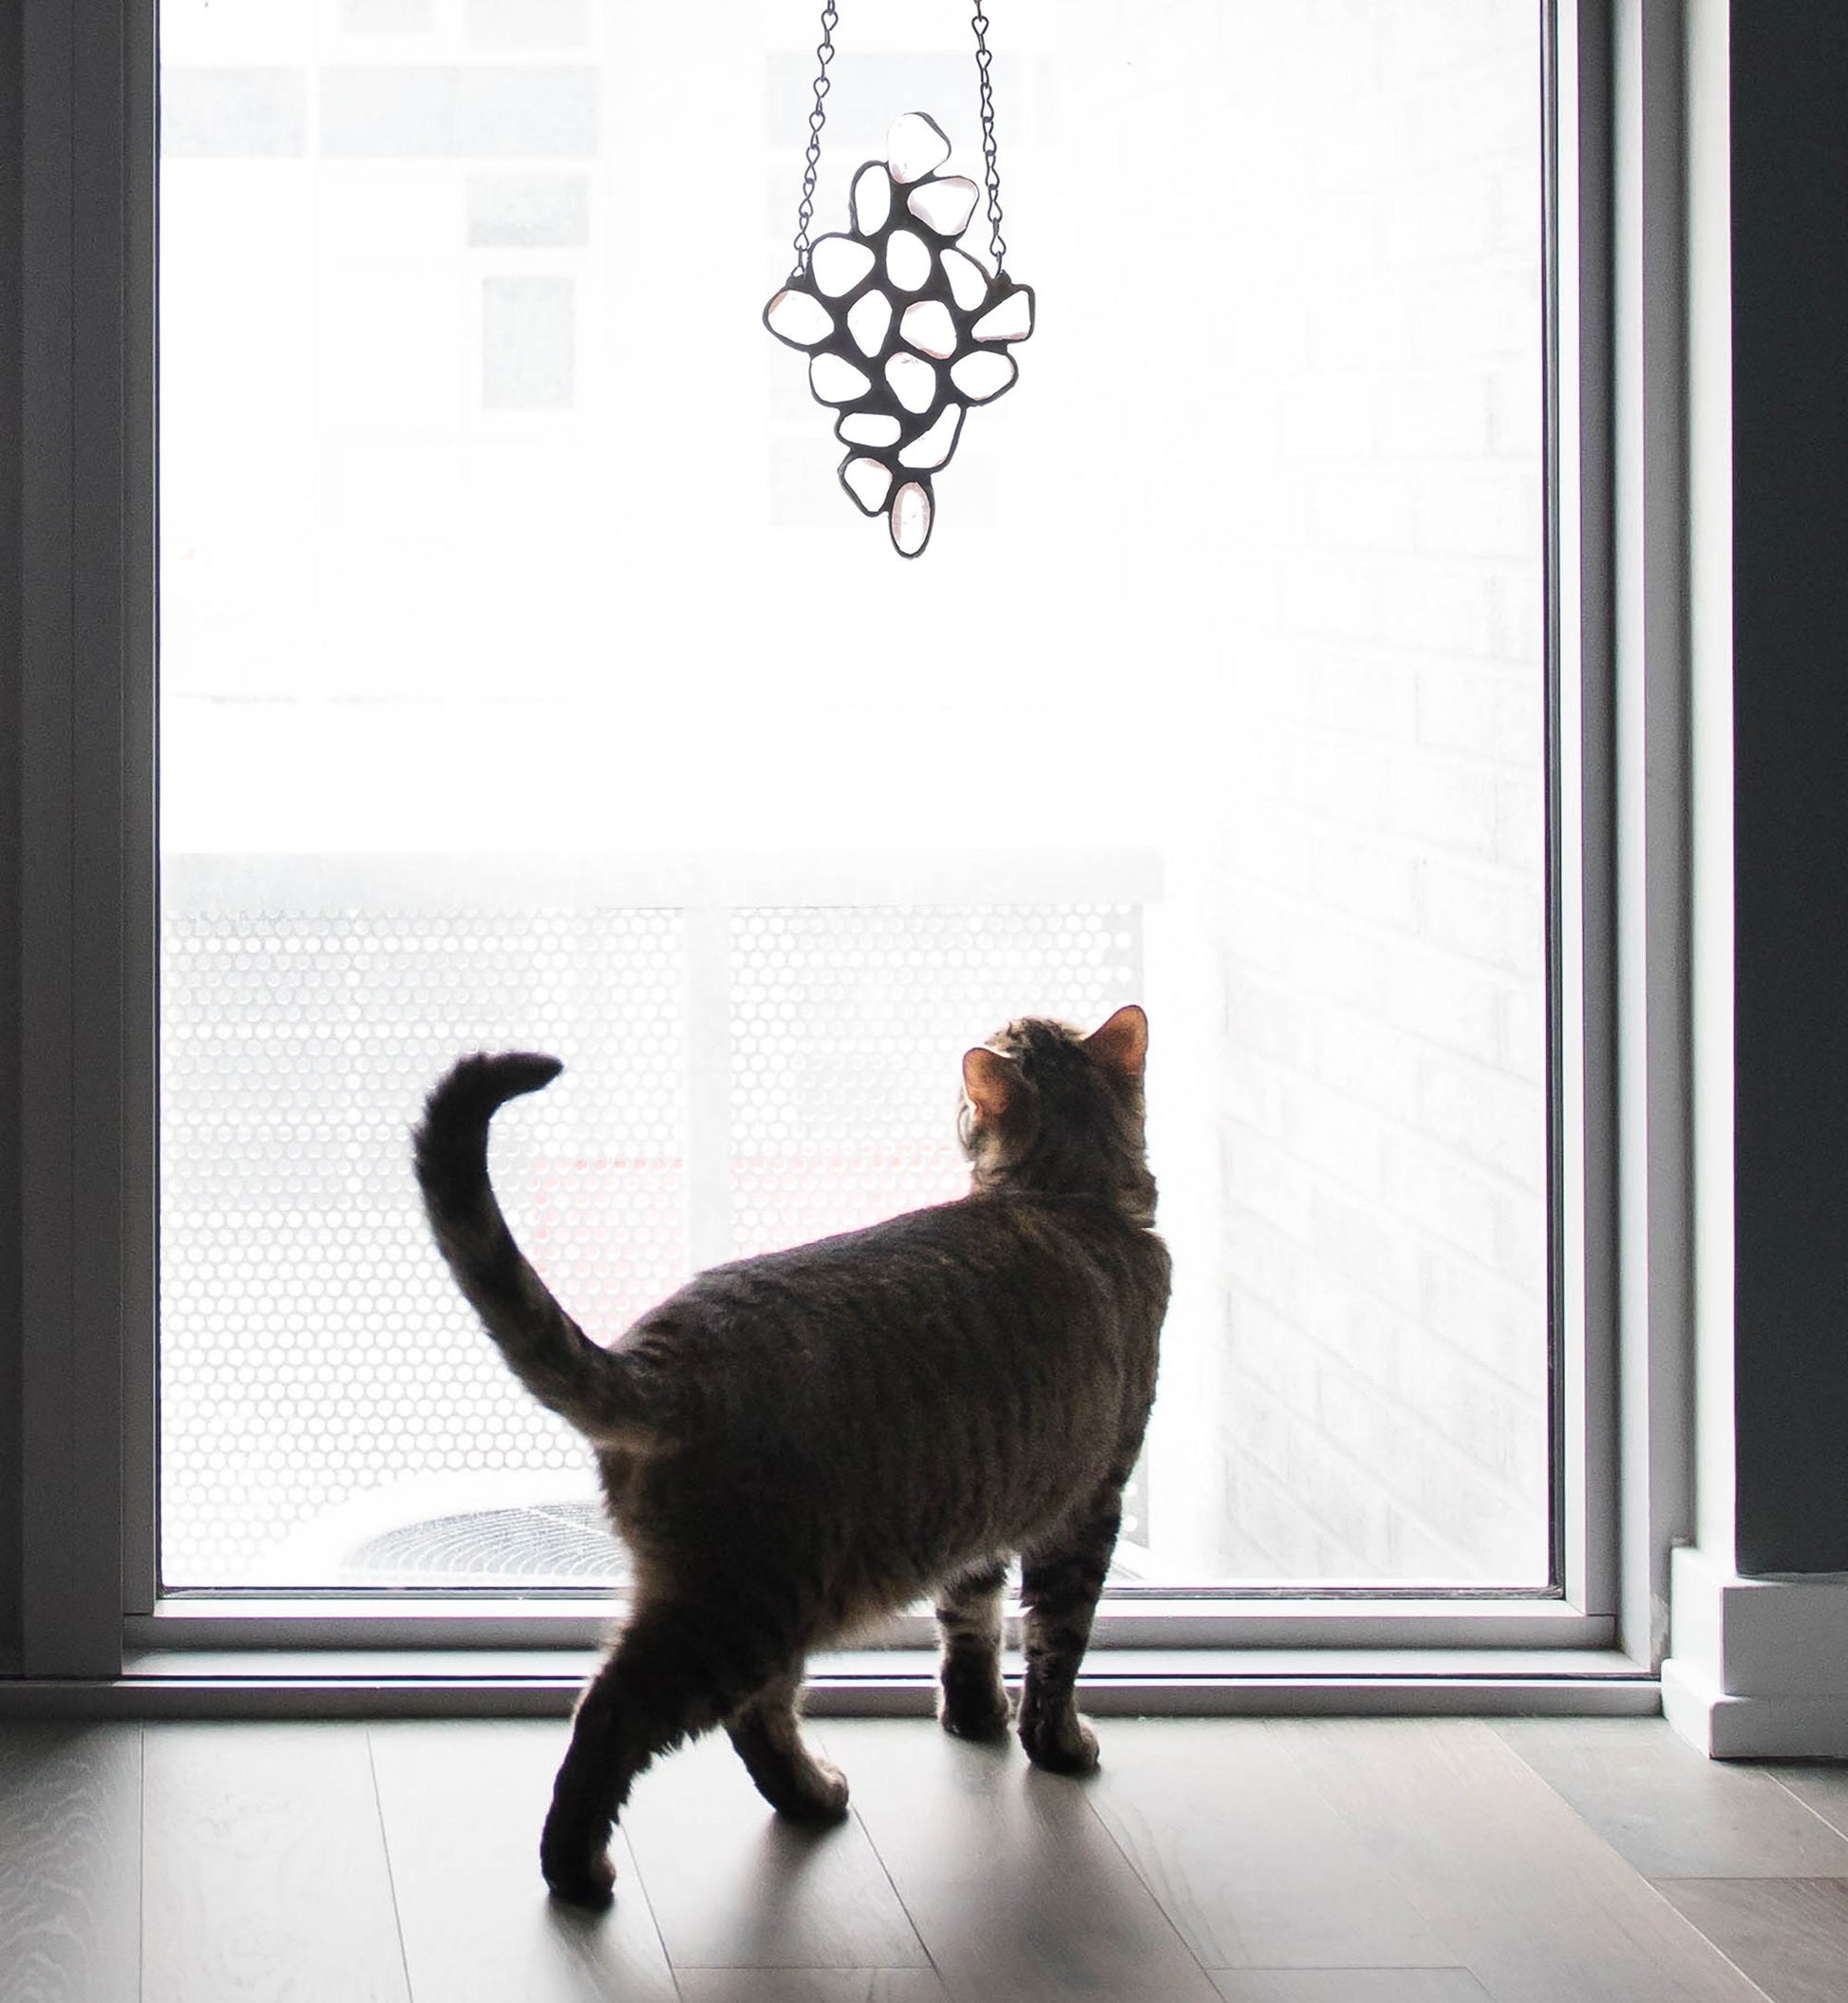 Handmade artwork, tumbled clear quartz crystal stained glass, Tiffany method, diamond shape, hanging in a window with a cat